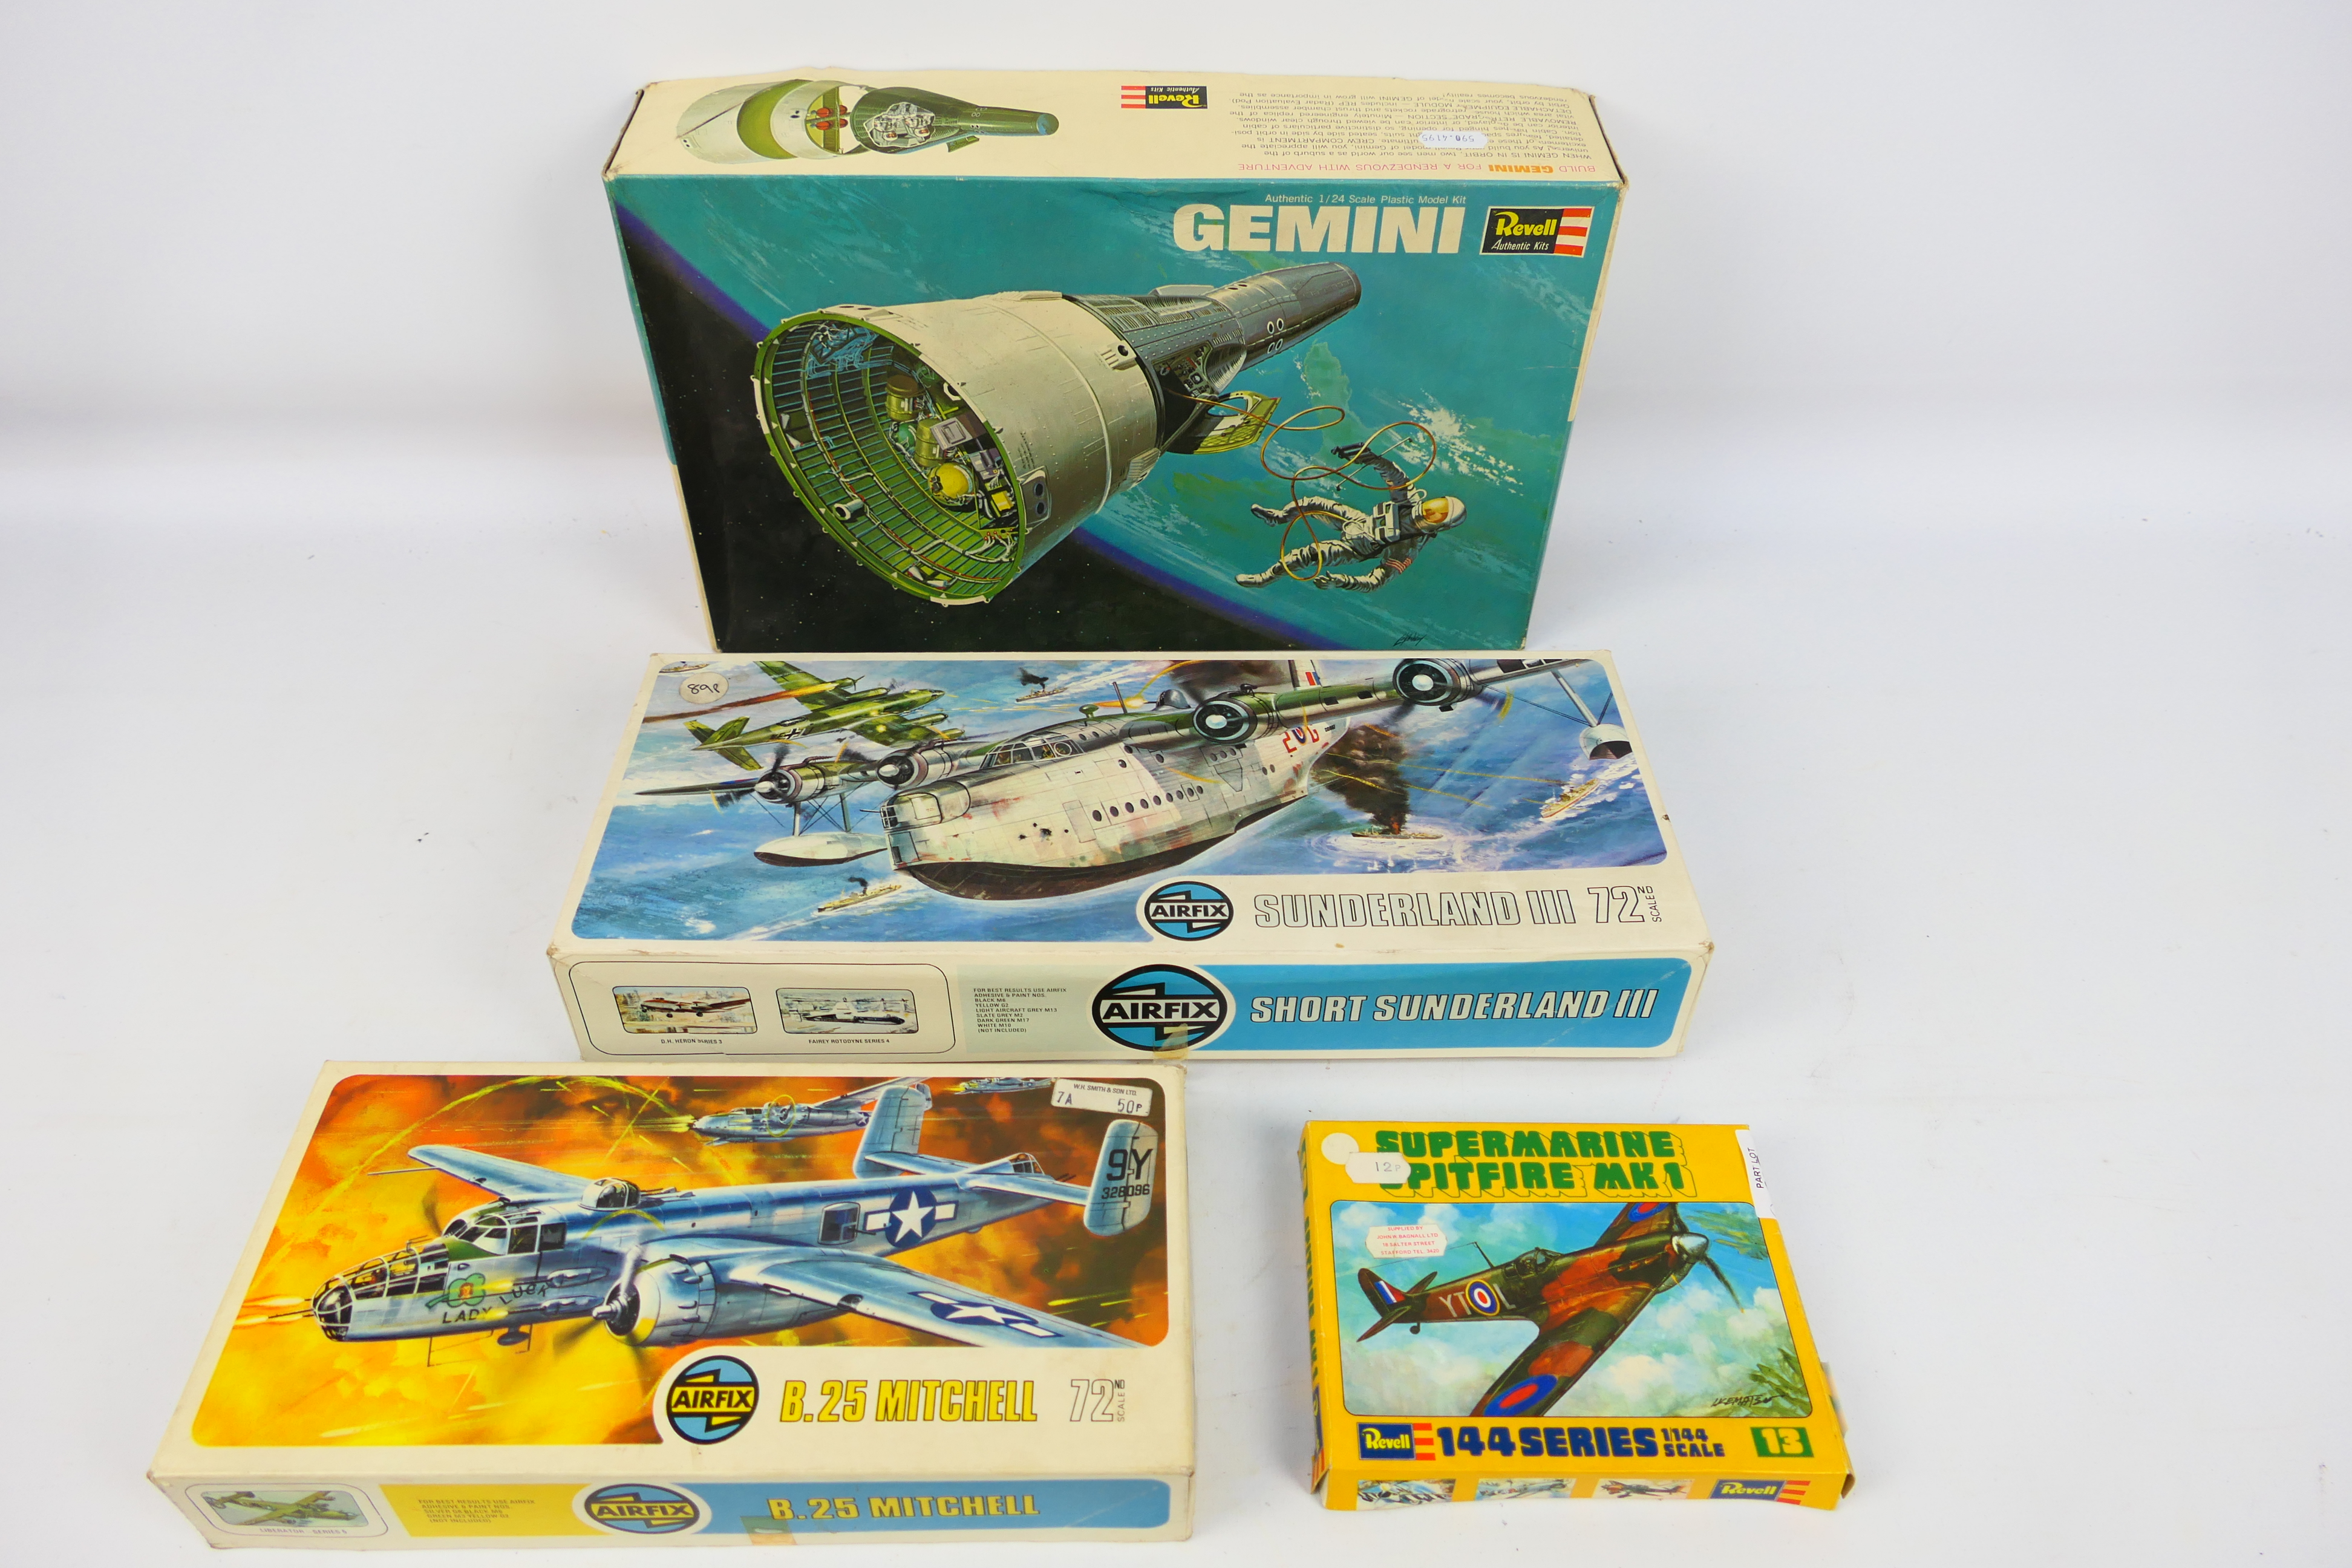 Airfix - Revell - Matchbox - 4 x vintage model kits including Gemini space capsule in 1:24 scale # - Image 2 of 12